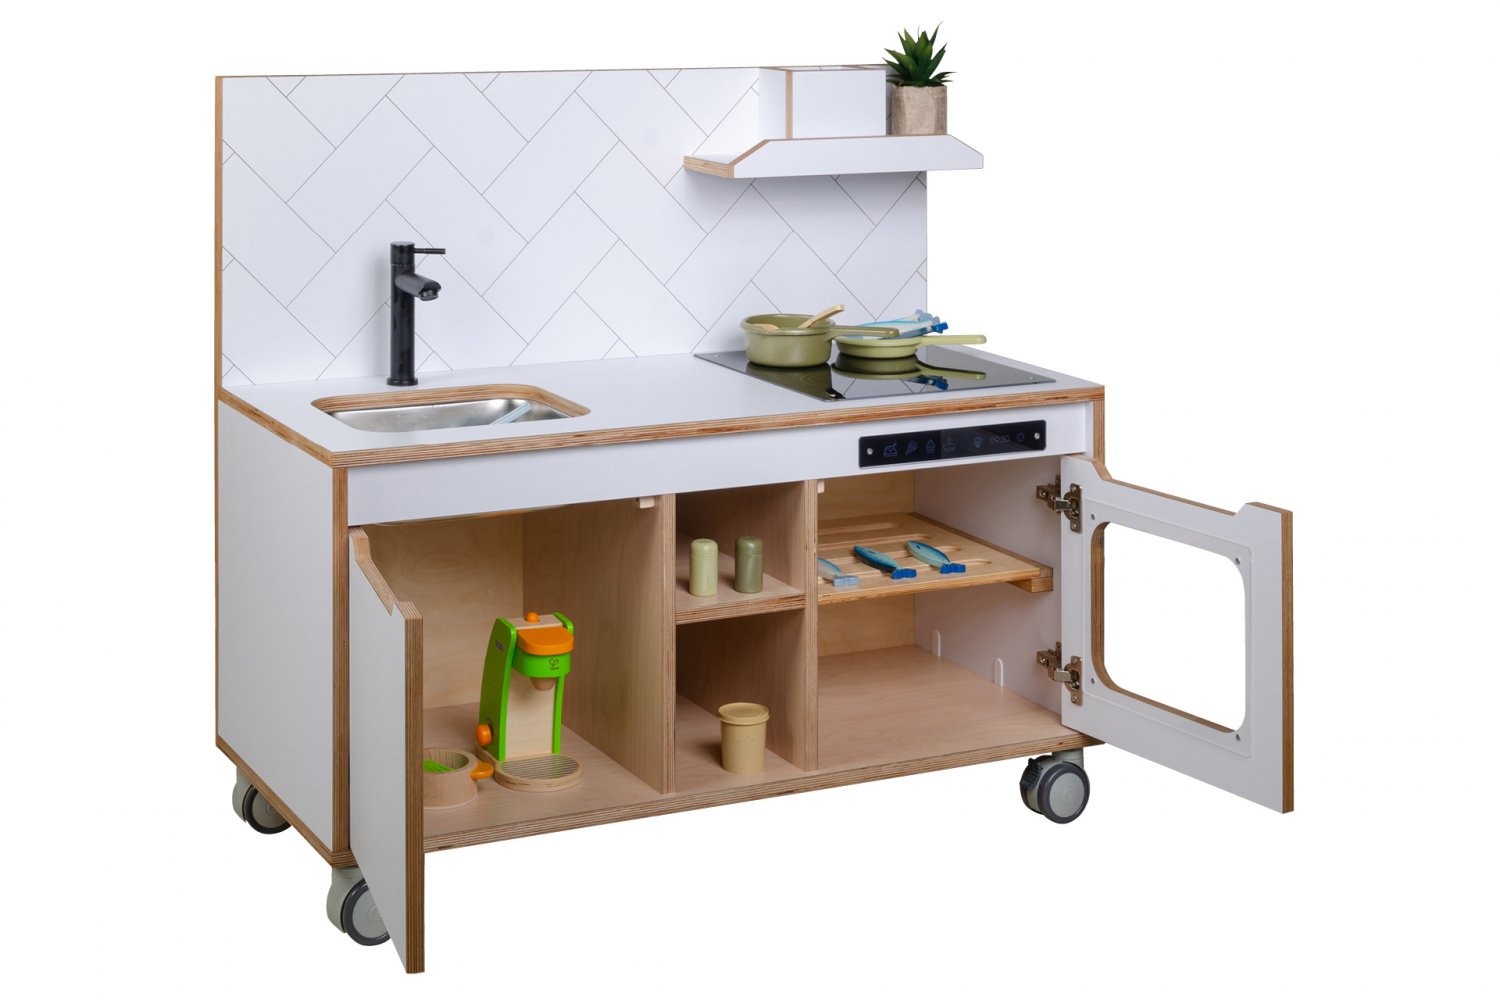 Wooden Plywood Kitchen for early learning